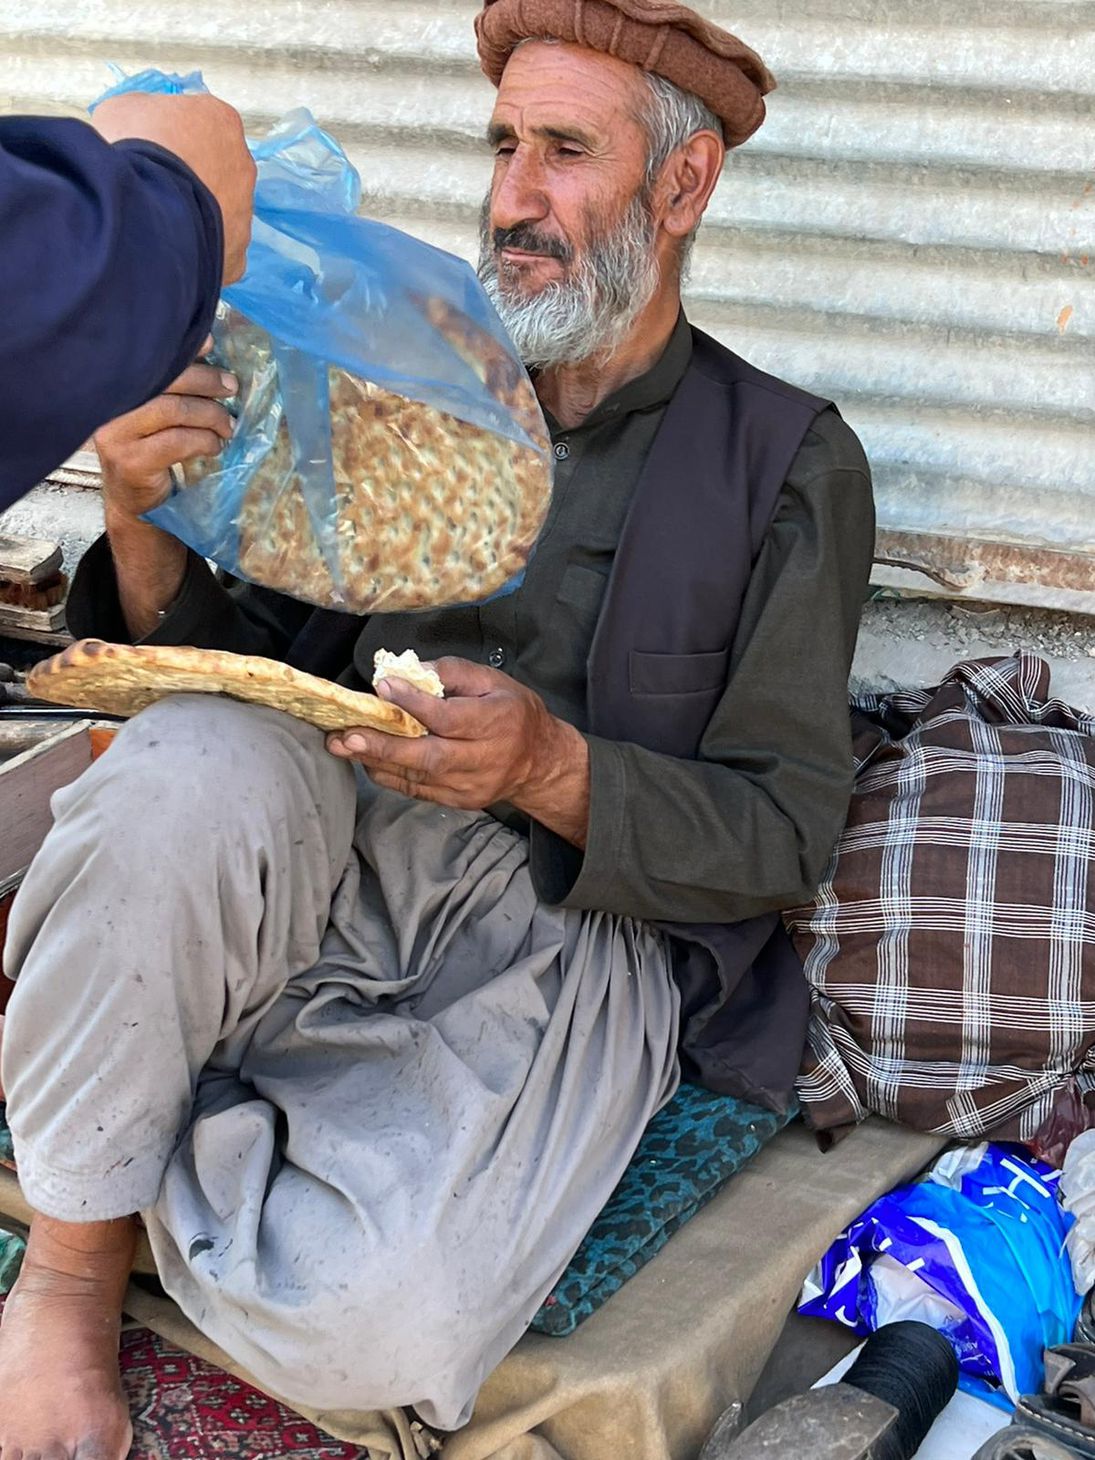 Old man without shoes dressed in blue with turban sitting on sidewalk and eating the hemp bread.